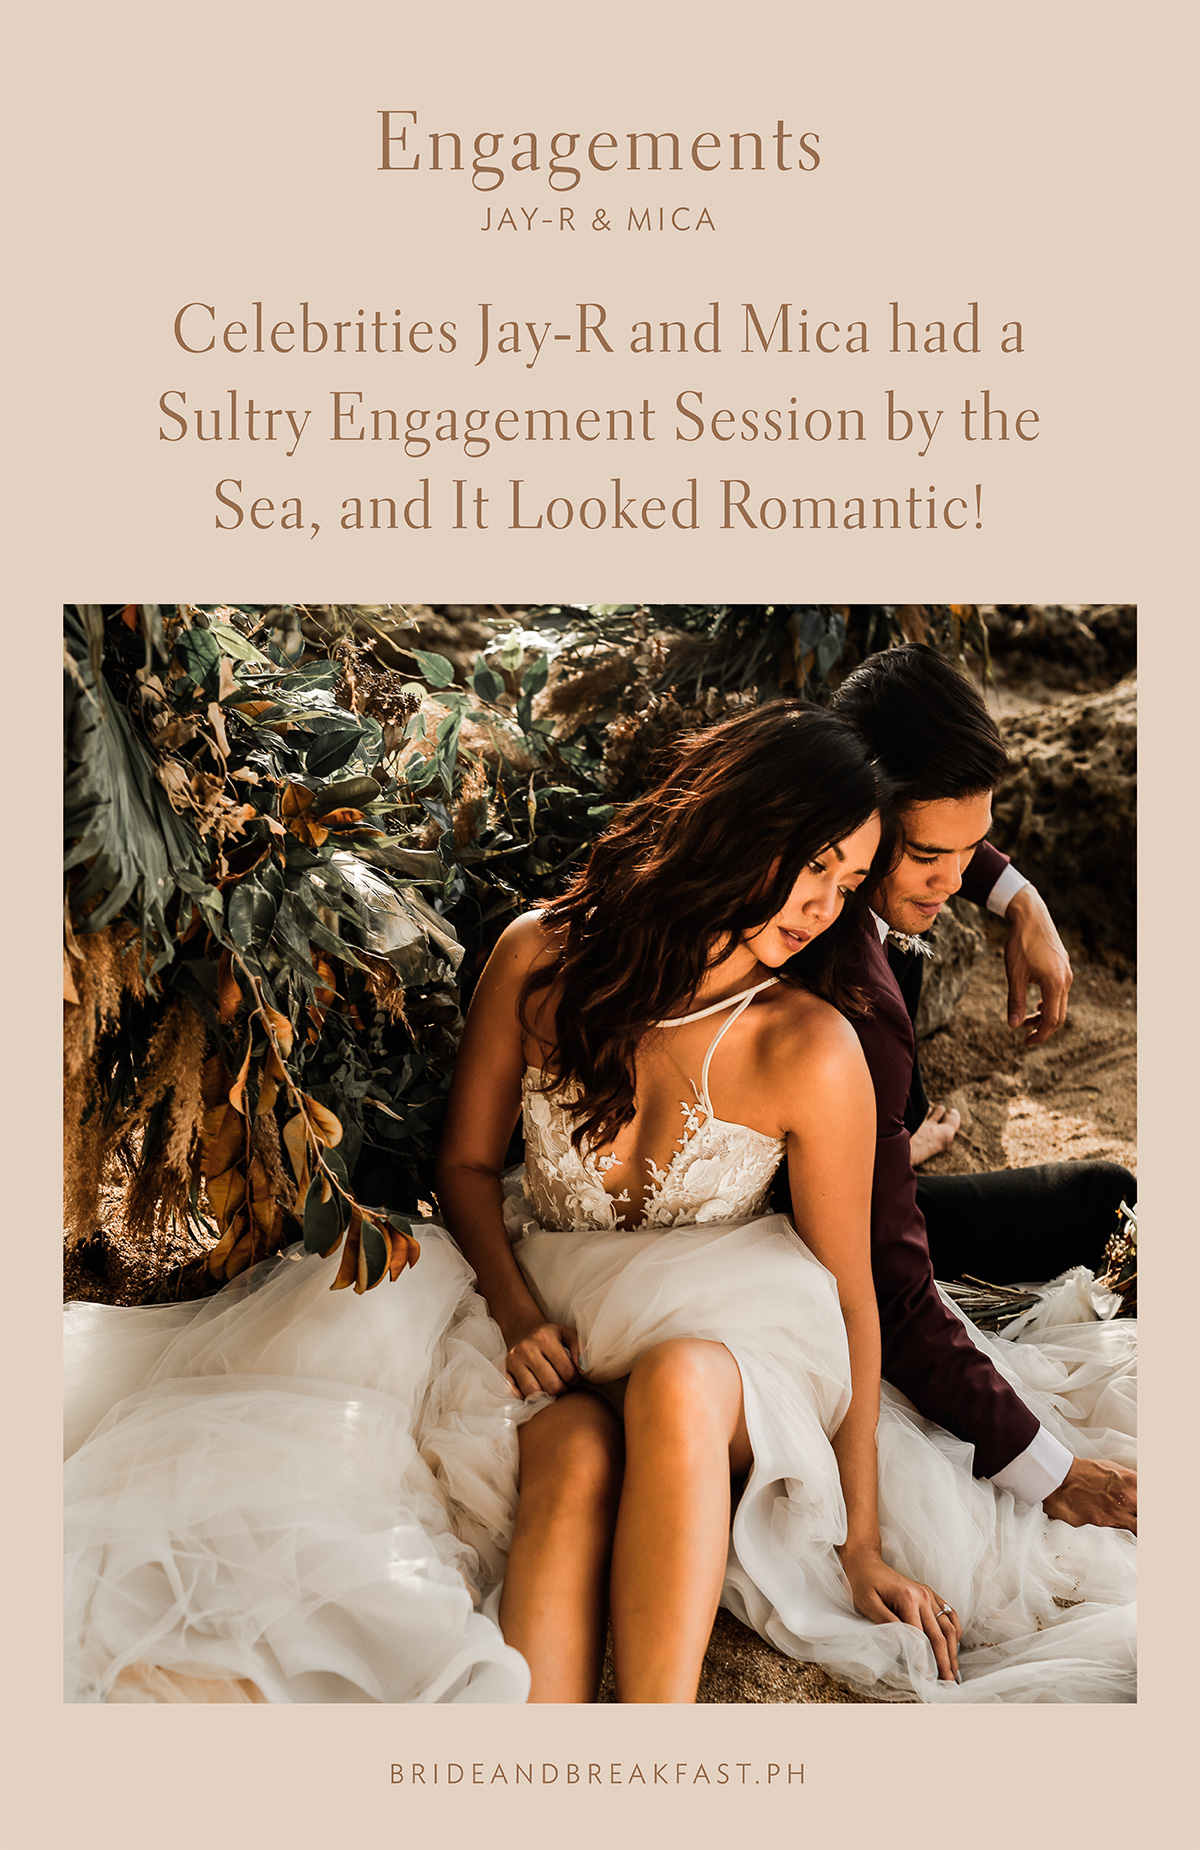 Engagements Jay-R & Mica Celebrities Jay-R and Mica had a Sultry Engagement Session by the Sea, and It Looked Romantic!